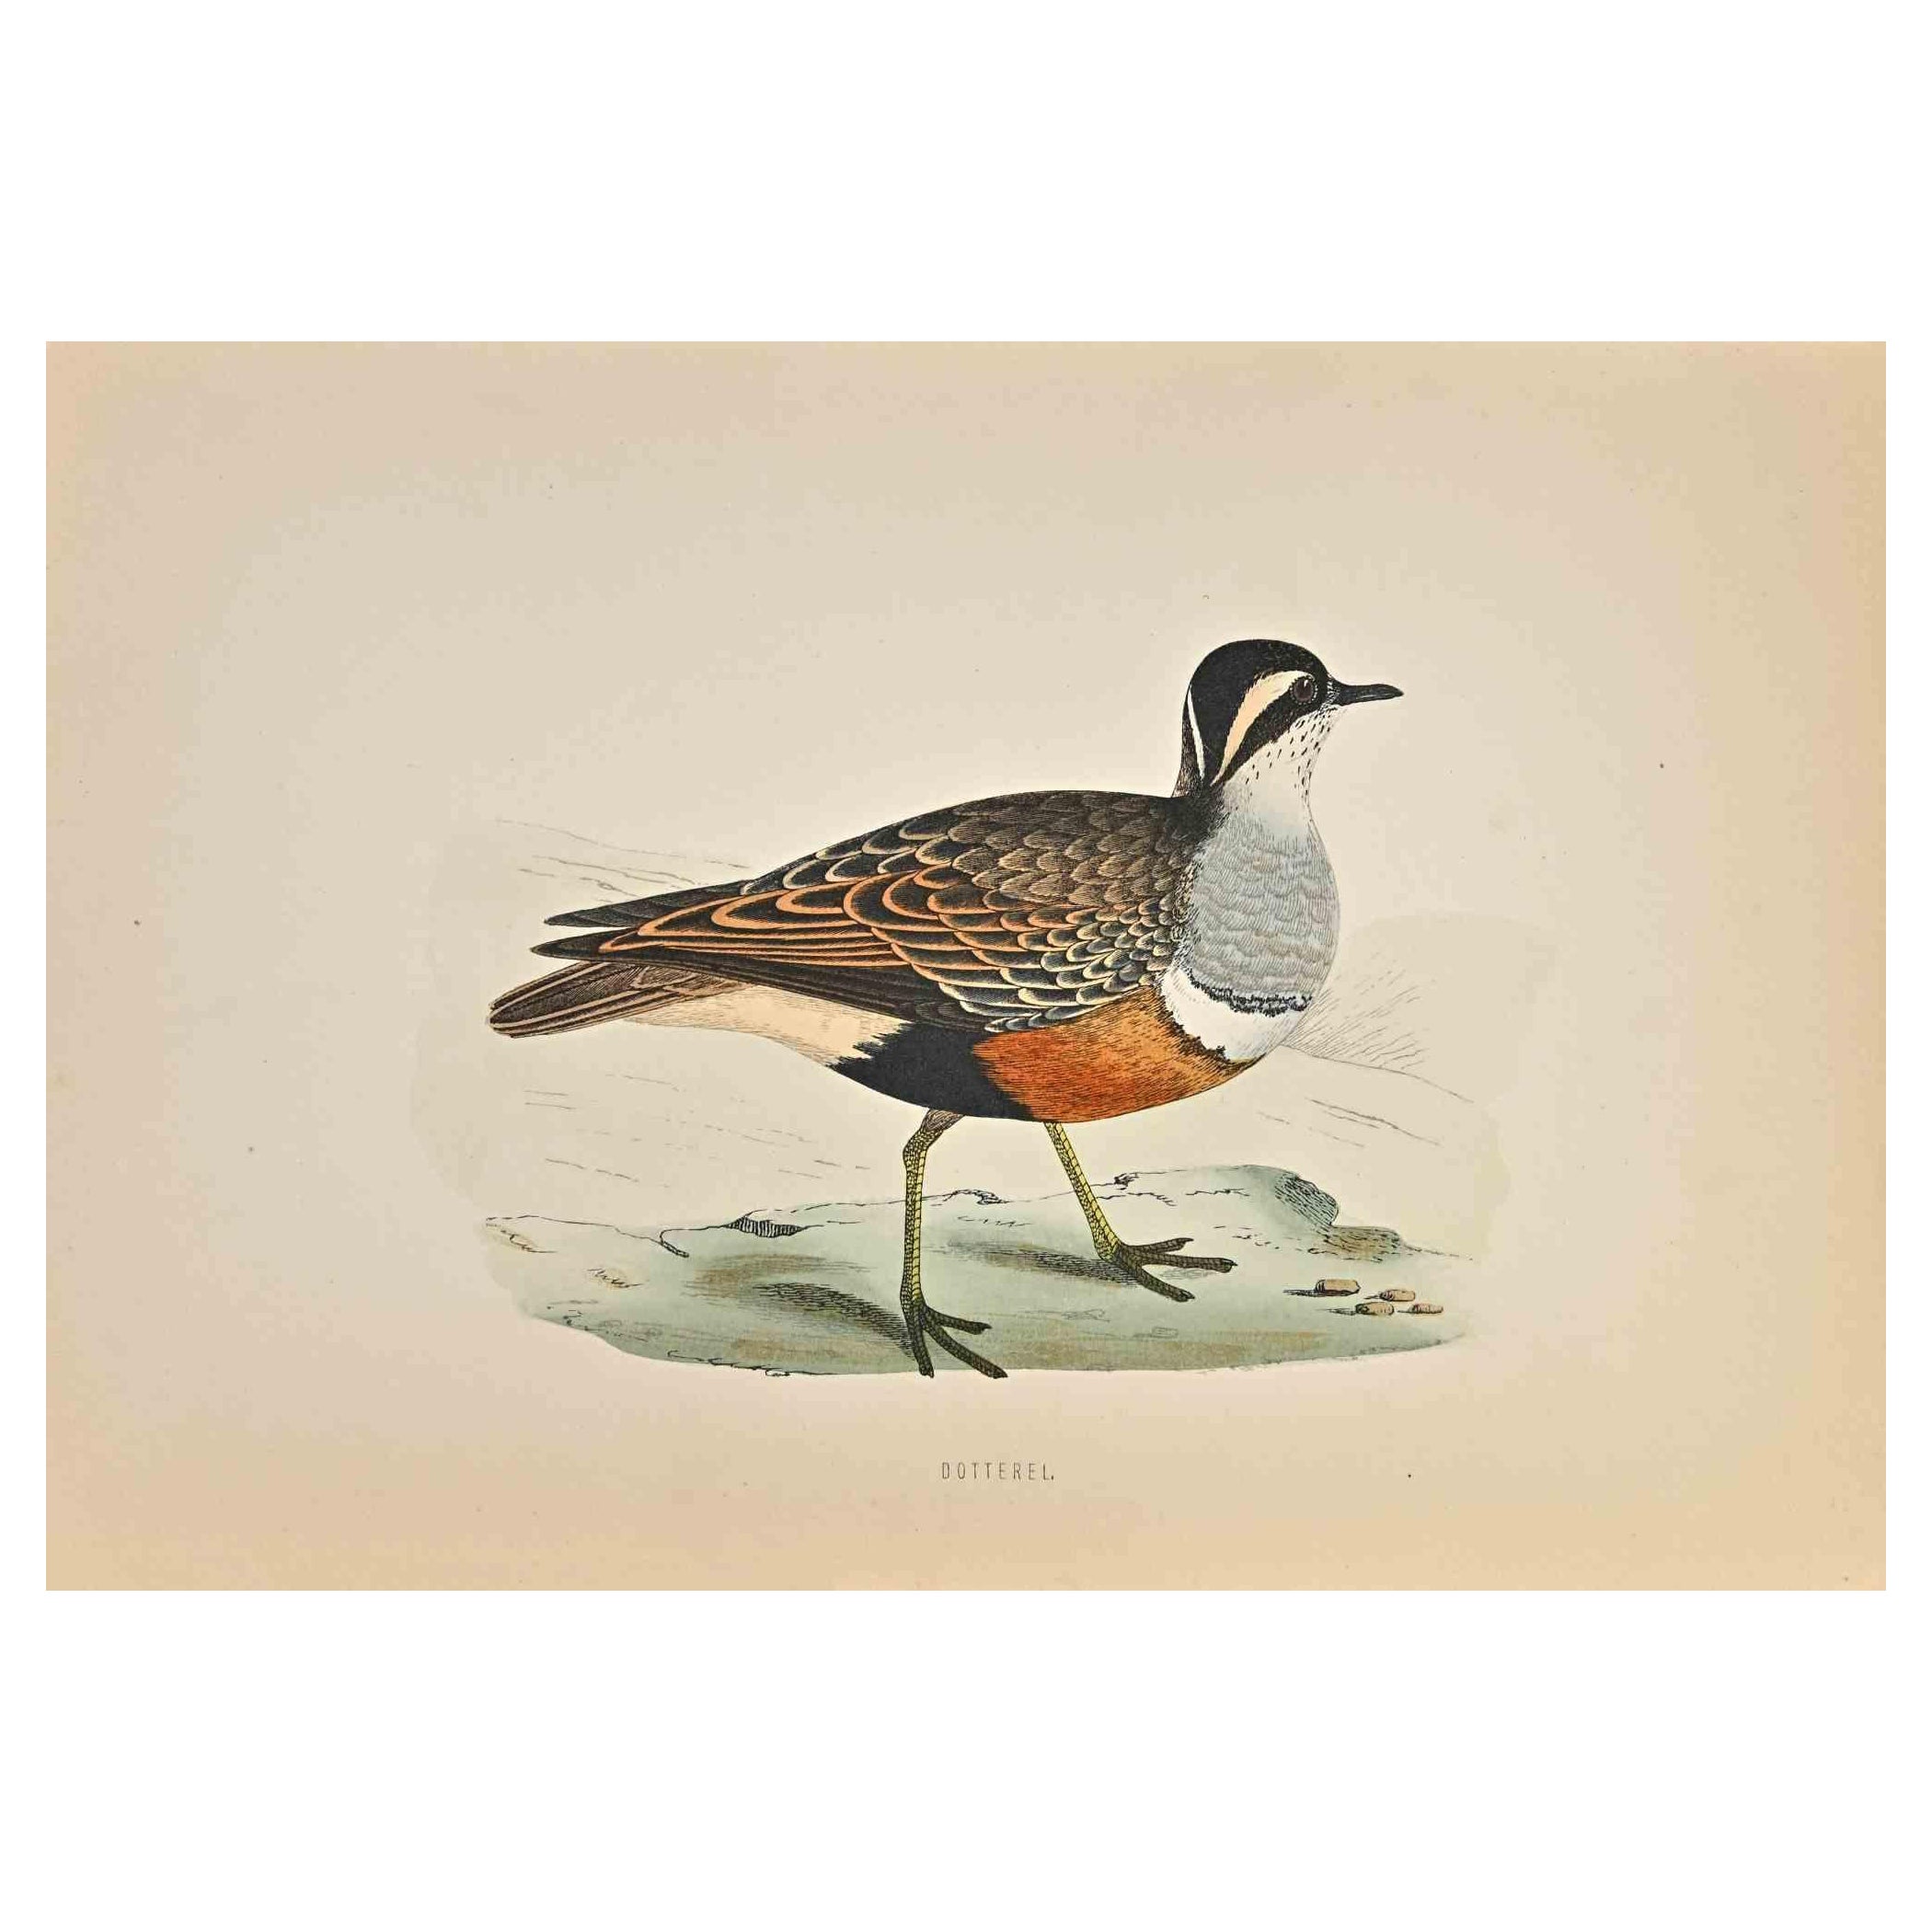 Dotterel is a modern artwork realized in 1870 by the British artist Alexander Francis Lydon (1836-1917) . 

Woodcut print, hand colored, published by London, Bell & Sons, 1870.  Name of the bird printed in plate. This work is part of a print suite